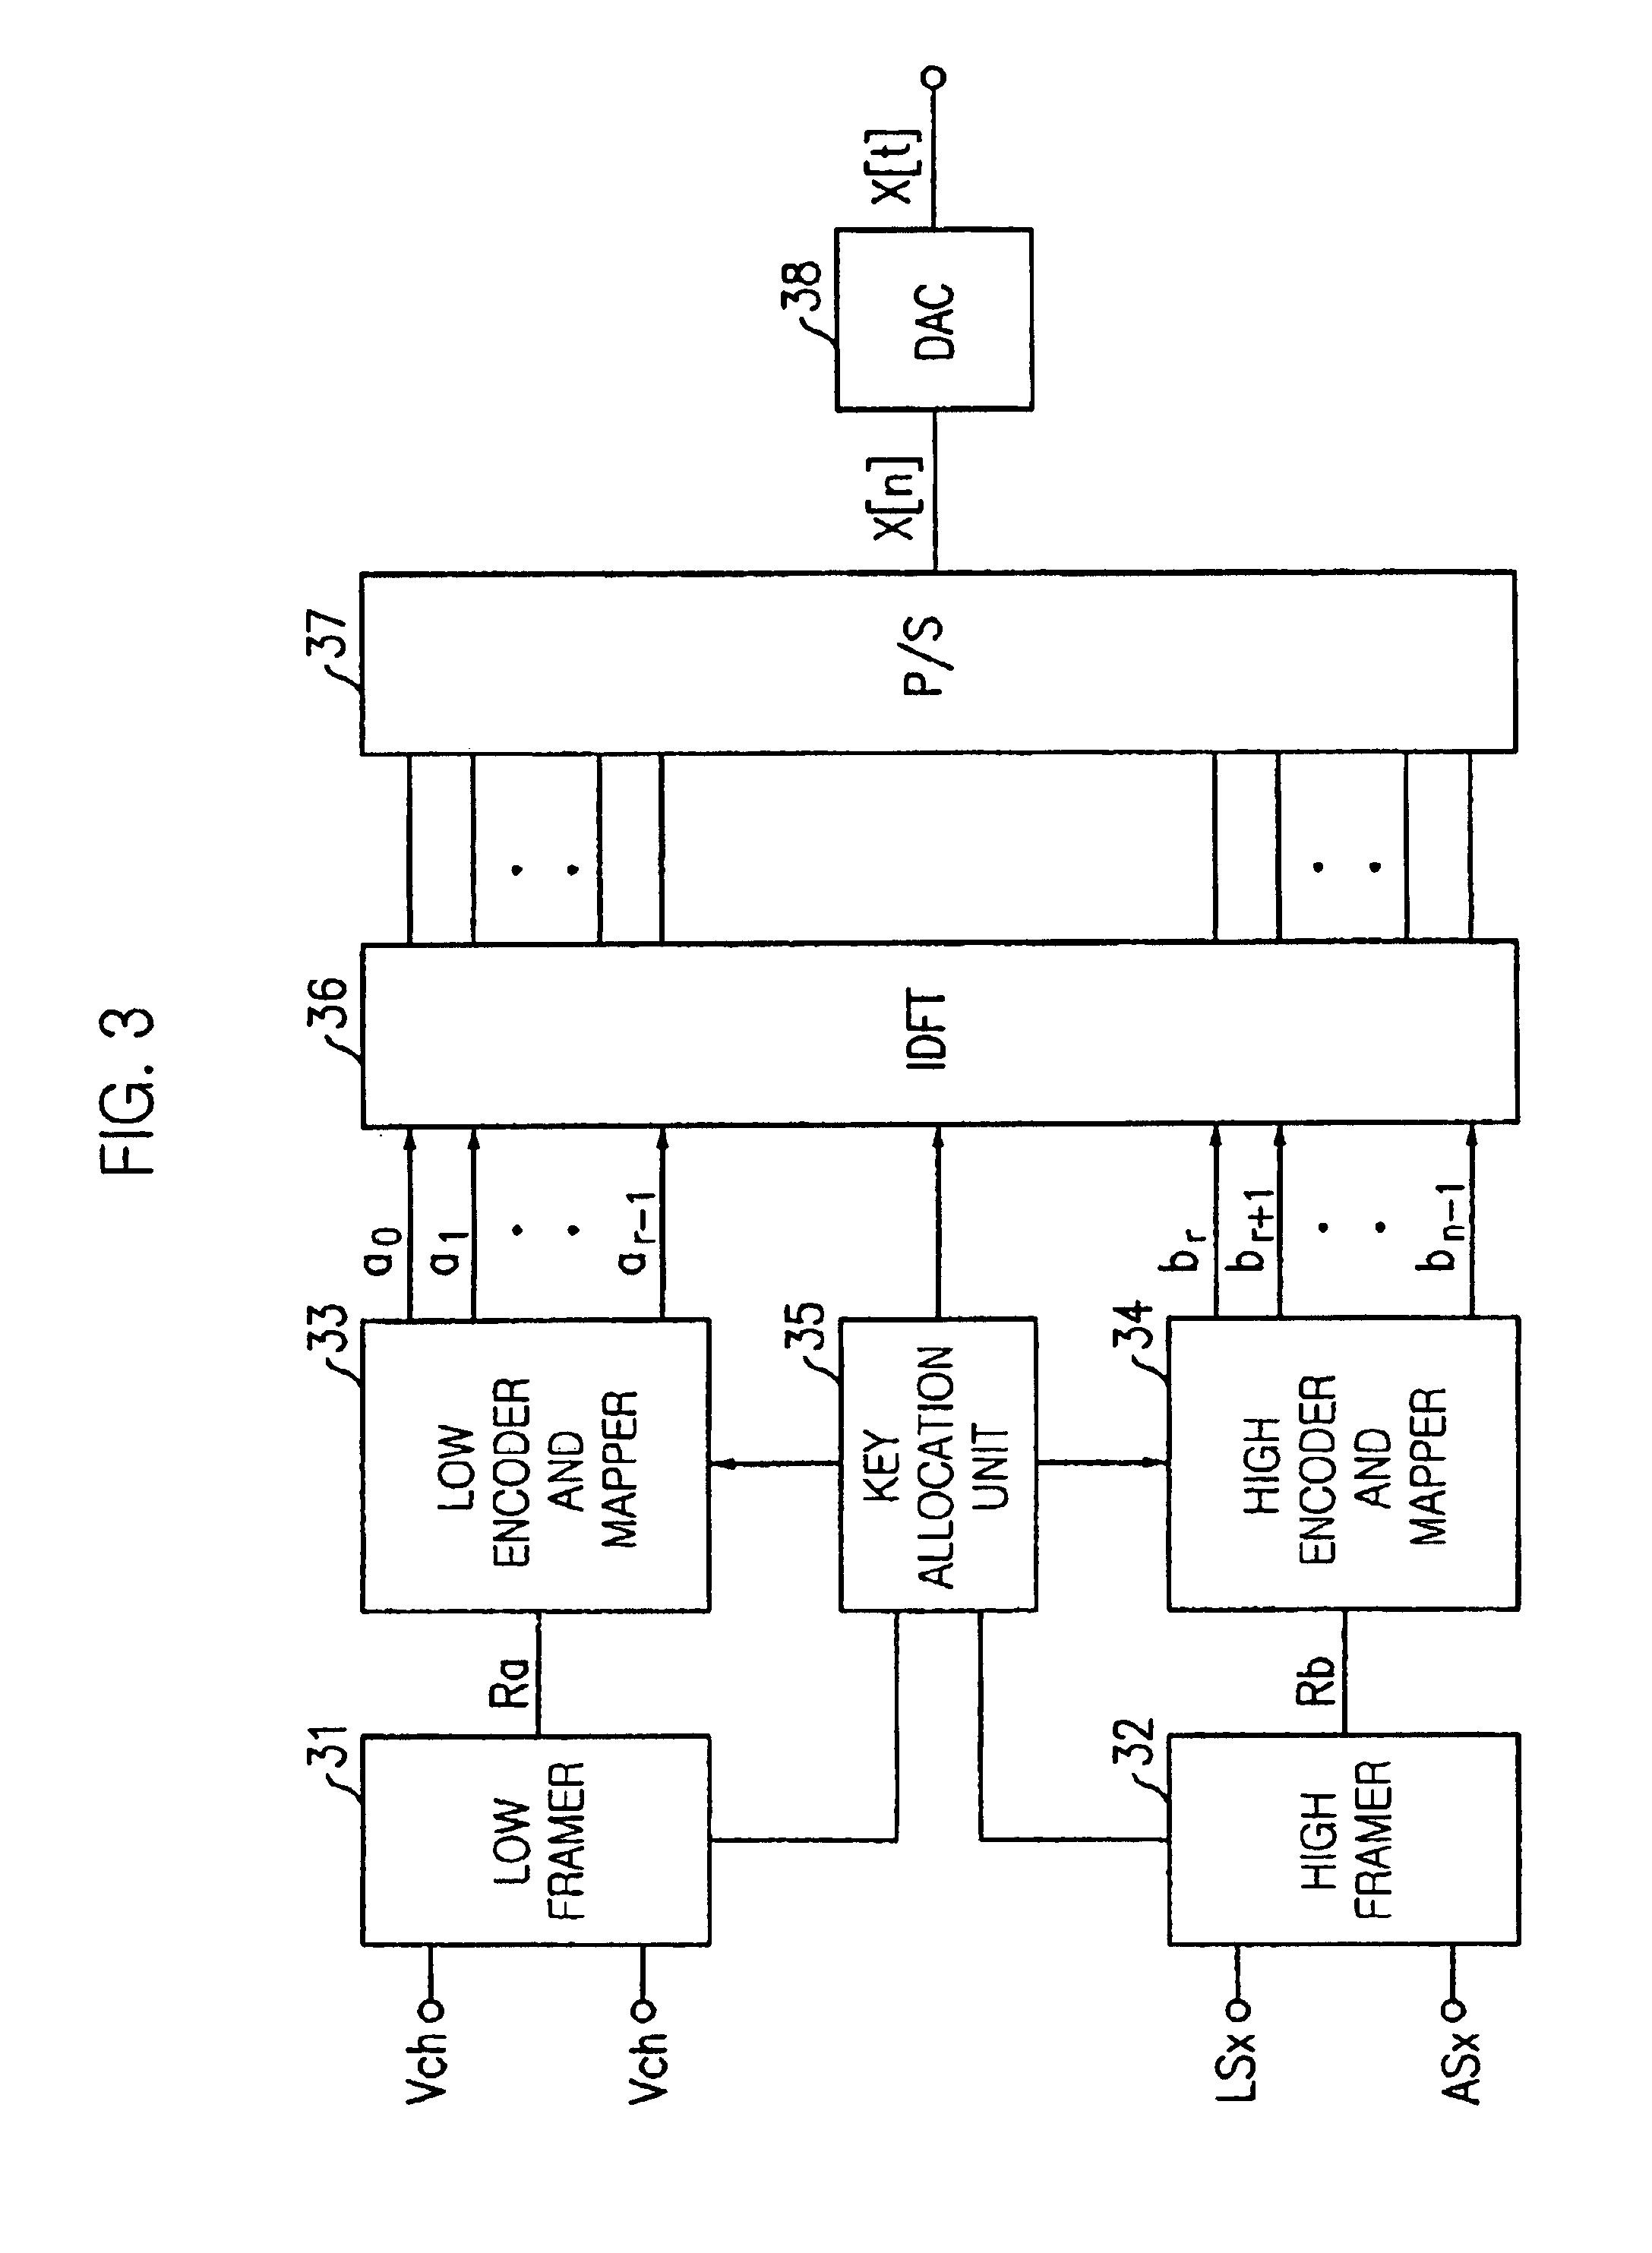 Apparatus and method for communicating signal in asymmetric digital subscriber line network by using dual link discrete multi-tone